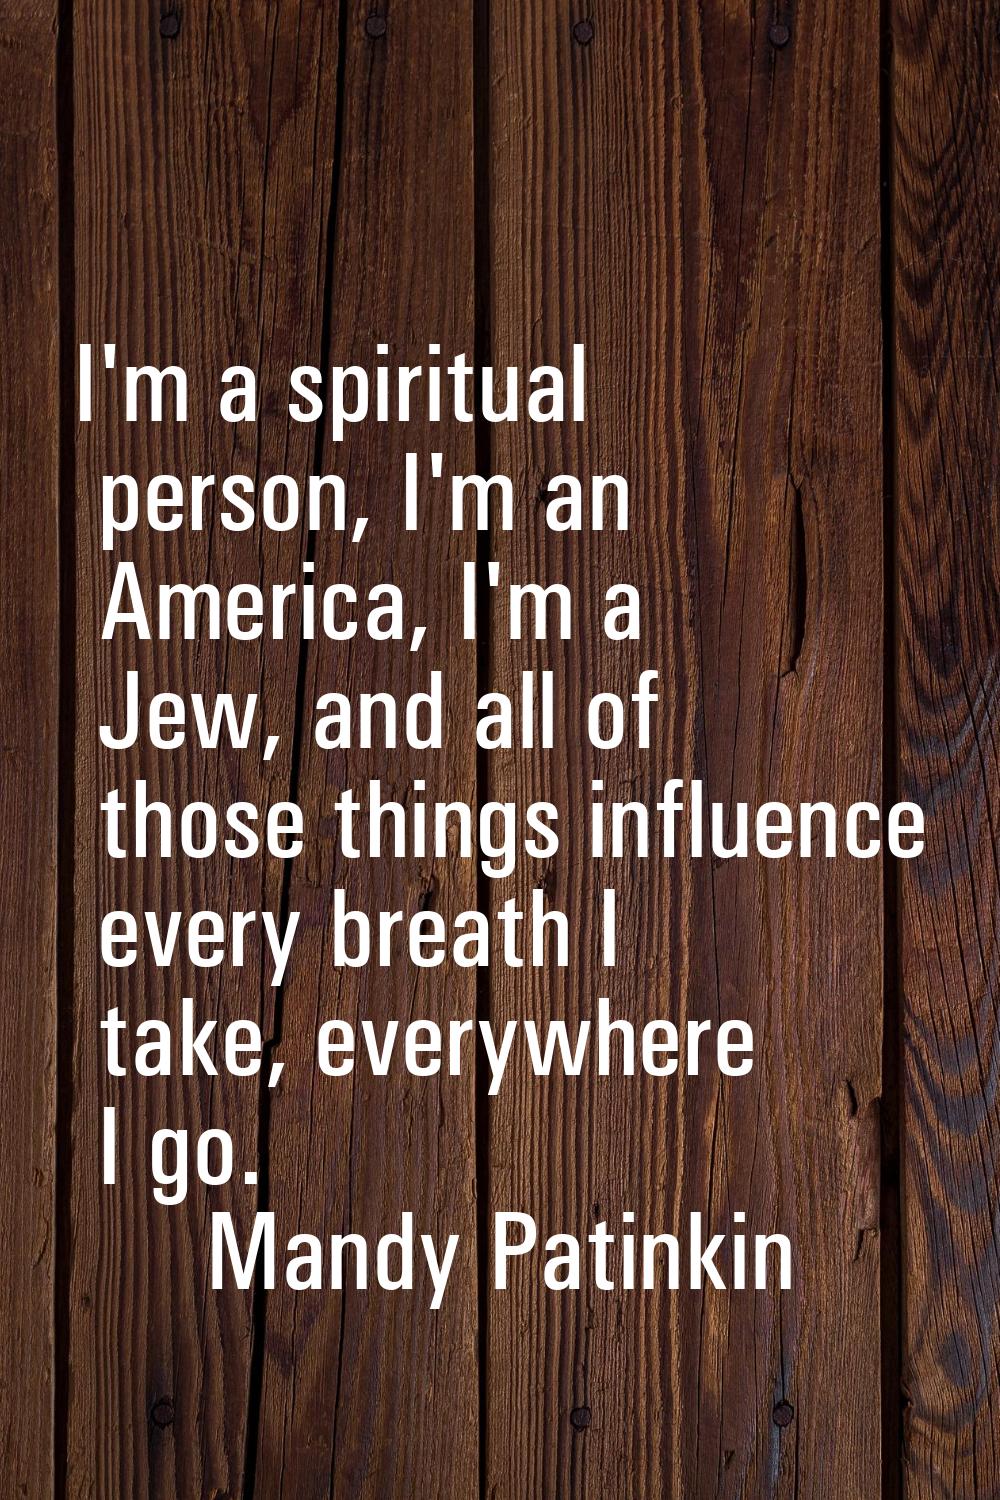 I'm a spiritual person, I'm an America, I'm a Jew, and all of those things influence every breath I